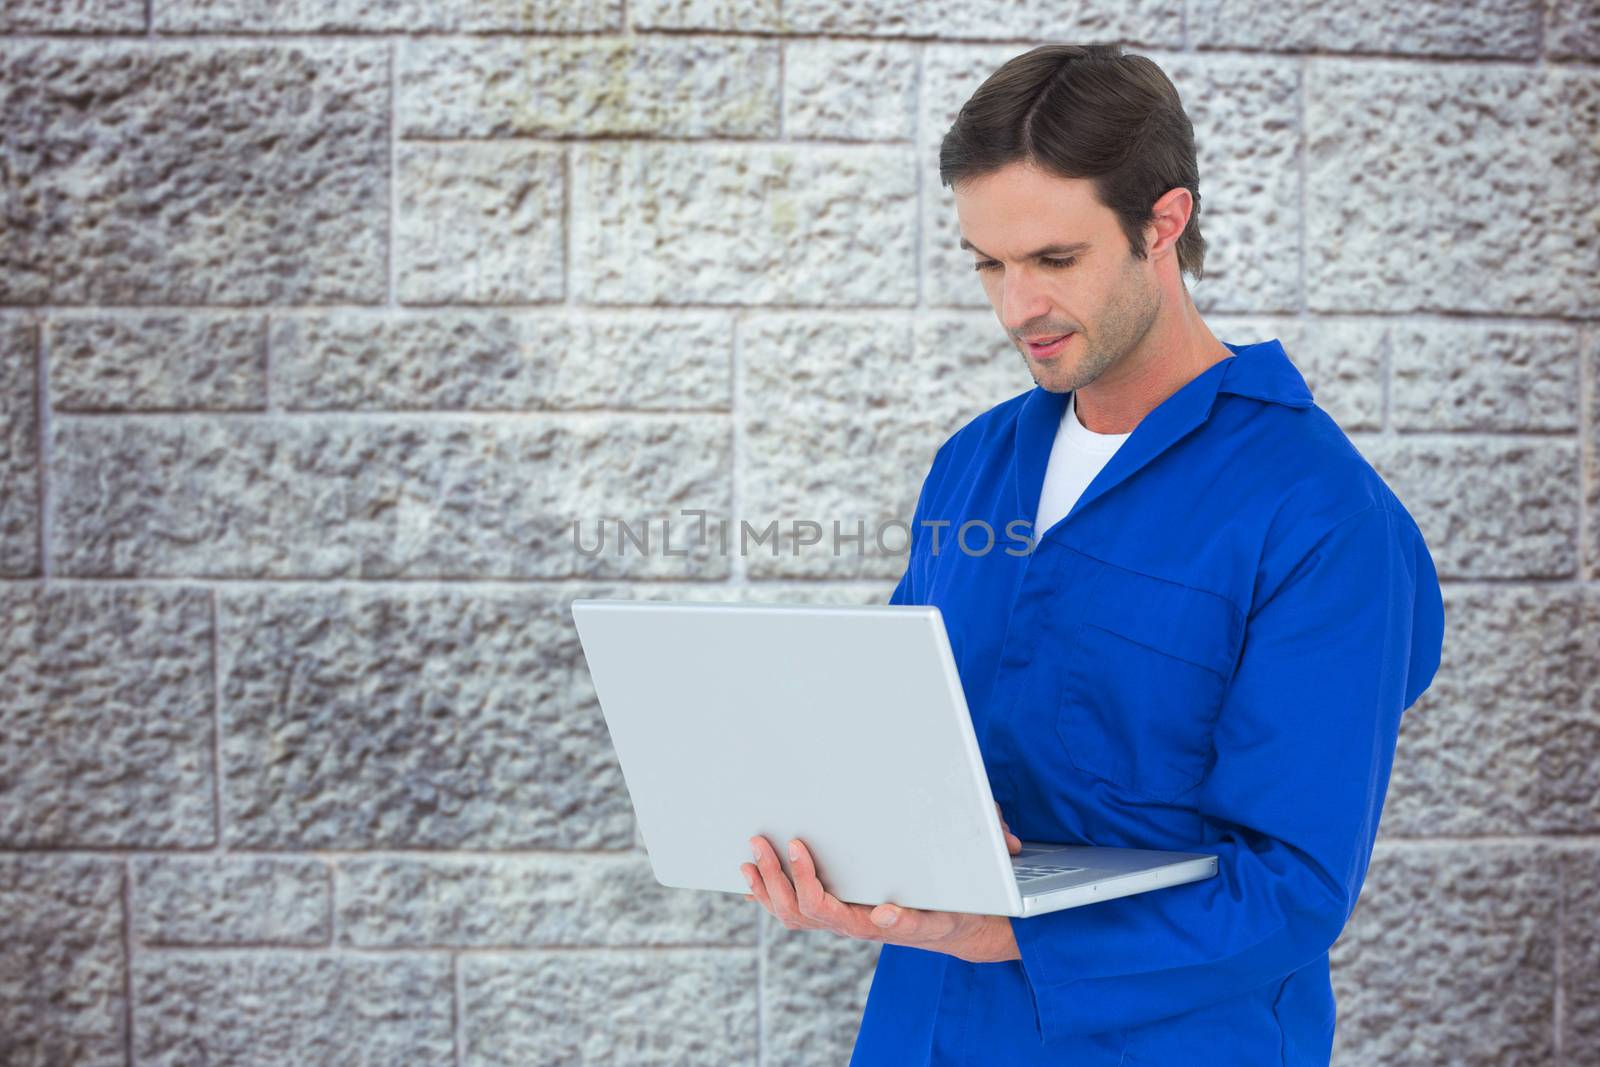 Mechanic using laptop over white background against grey brick wall